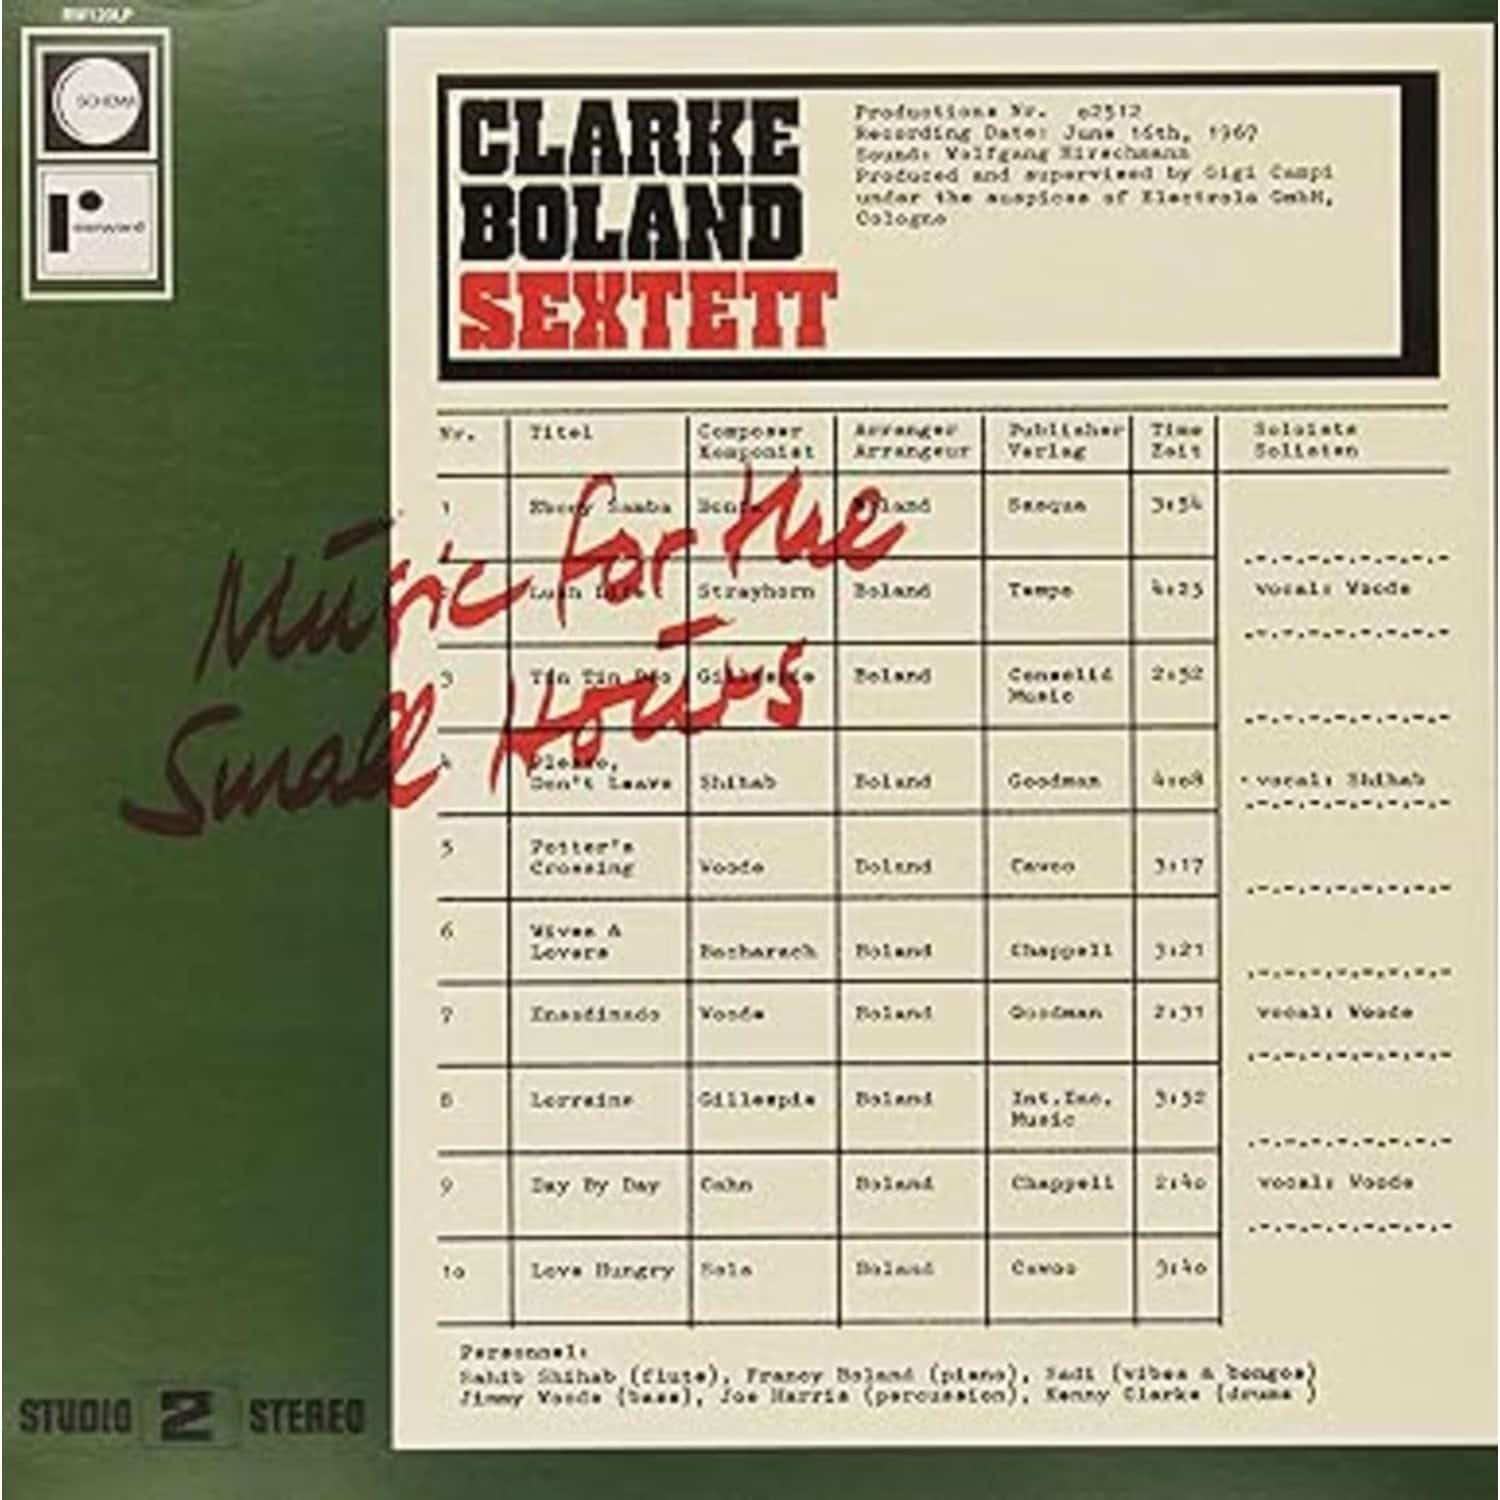 Clarke-Boland Sextett - MUSIC FOR THE SMALL HOURS 